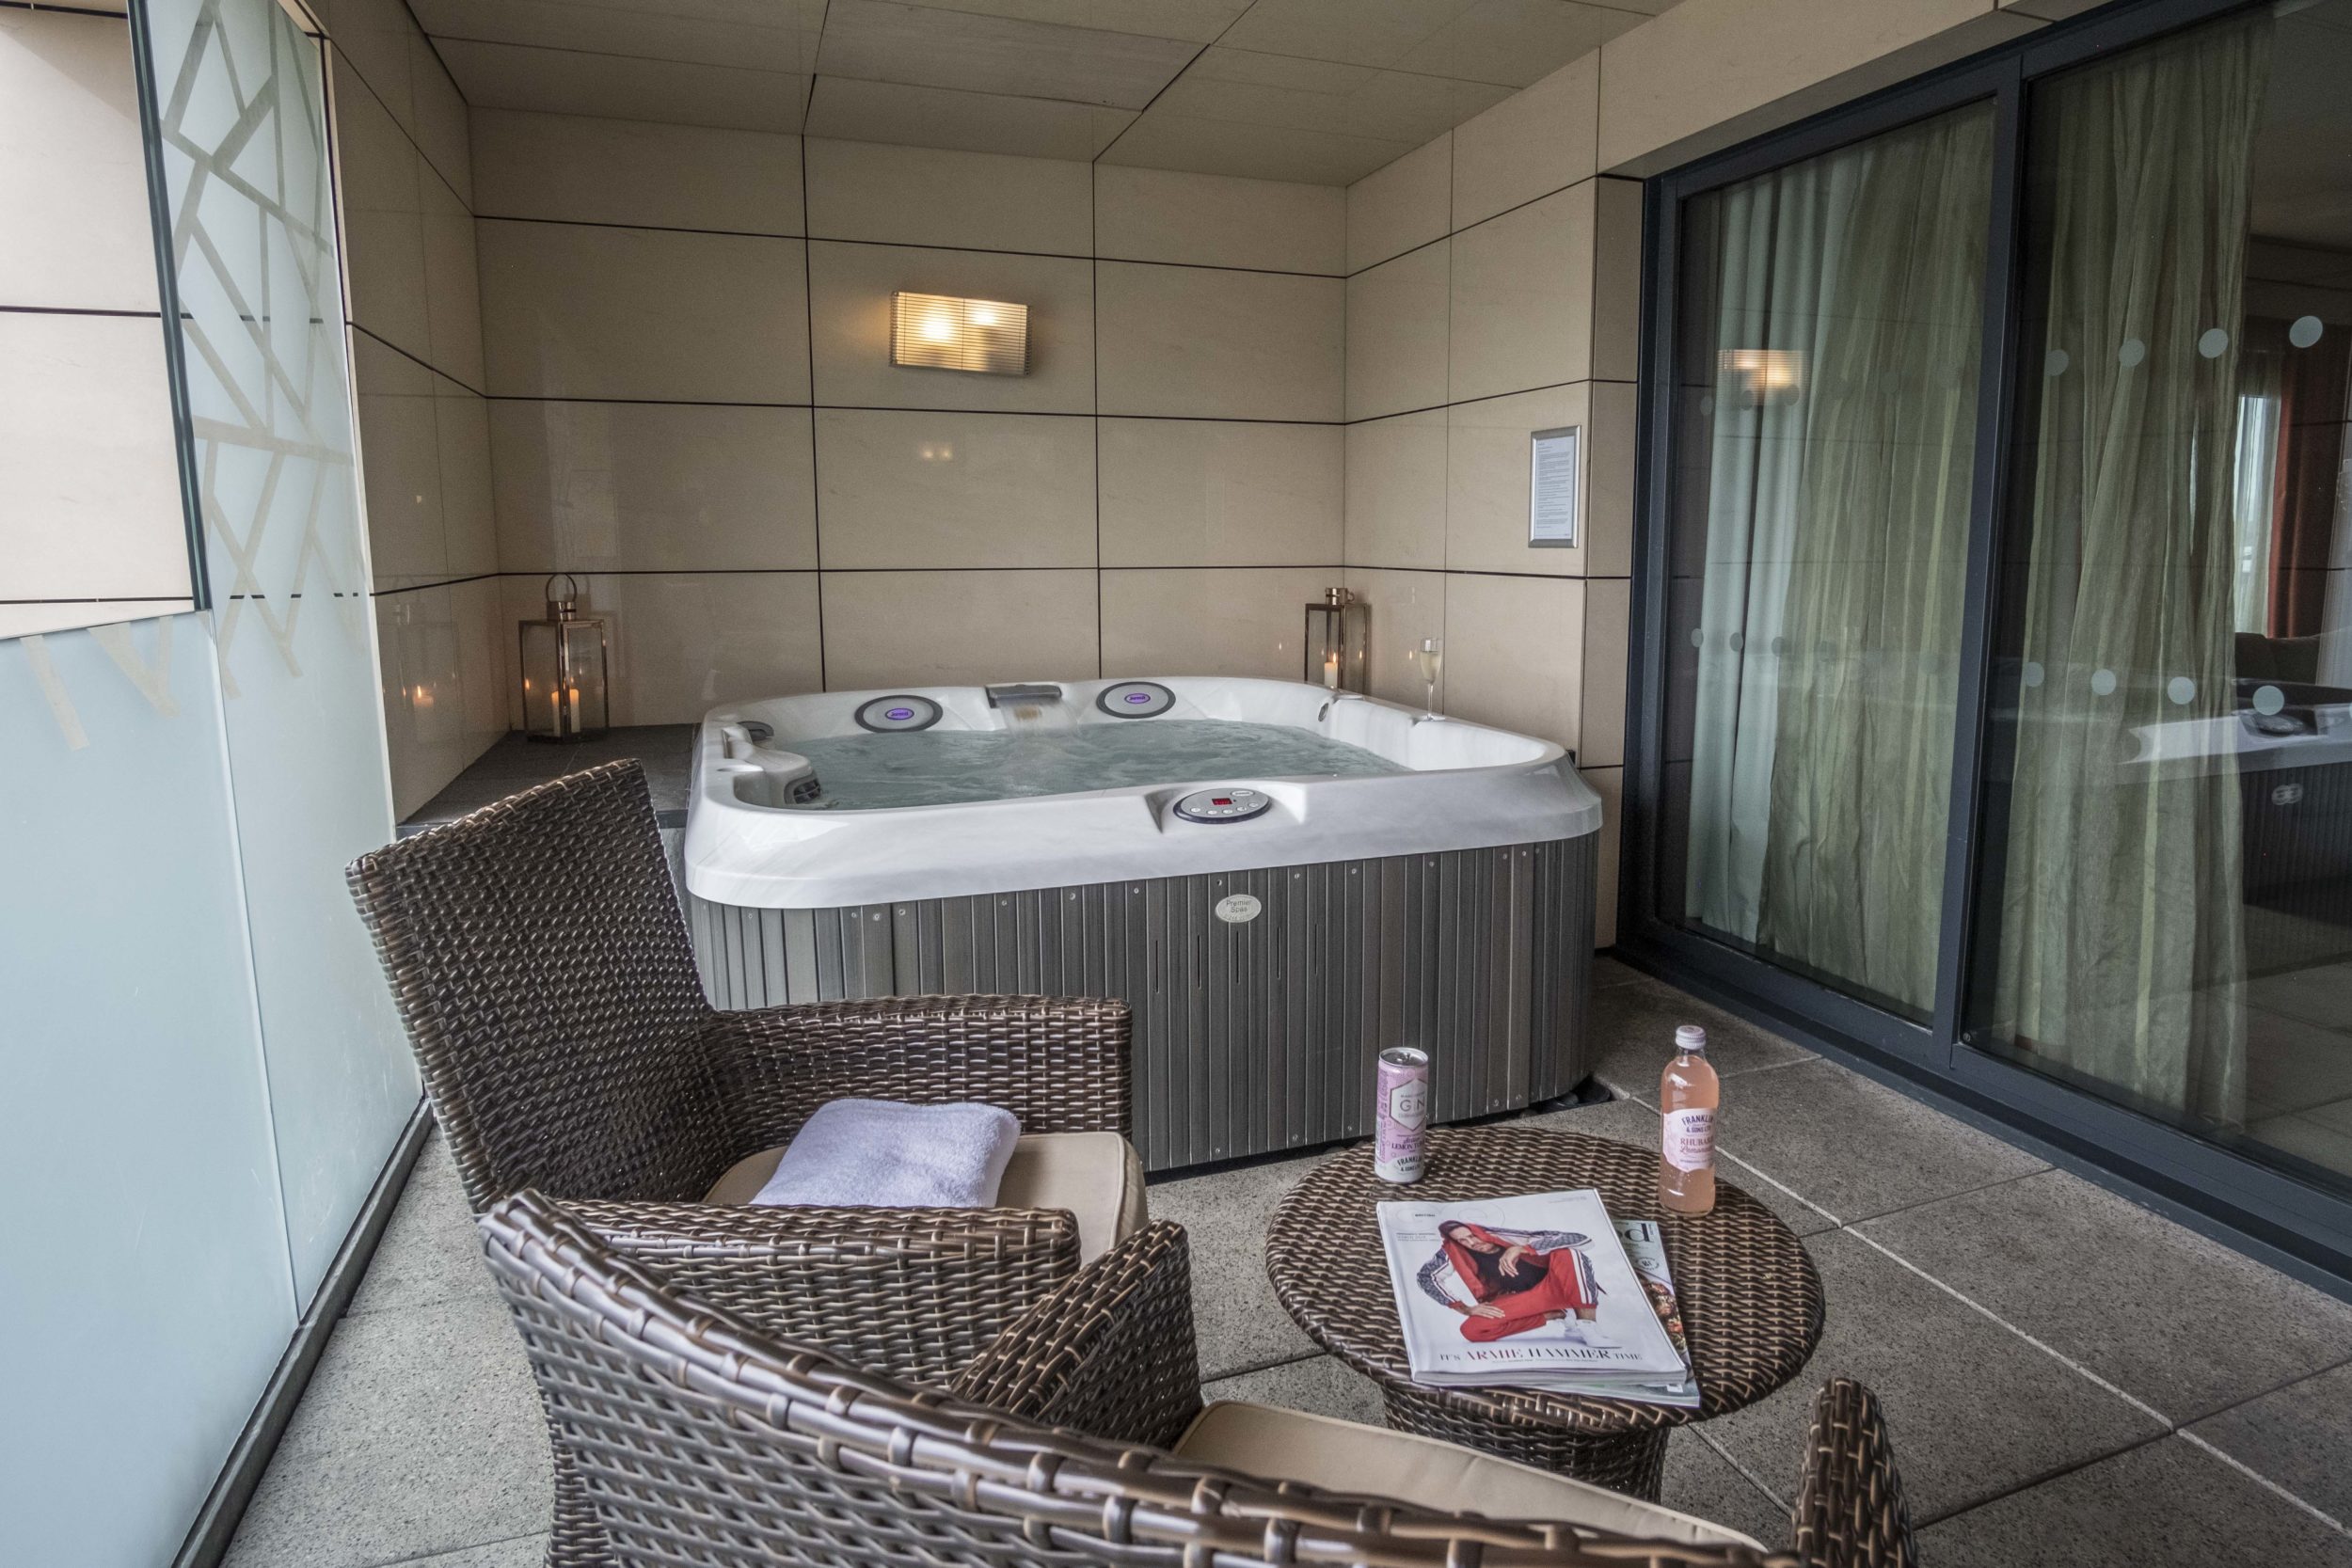 Casa Hotel | Hotels with hot tub in Chesterfield